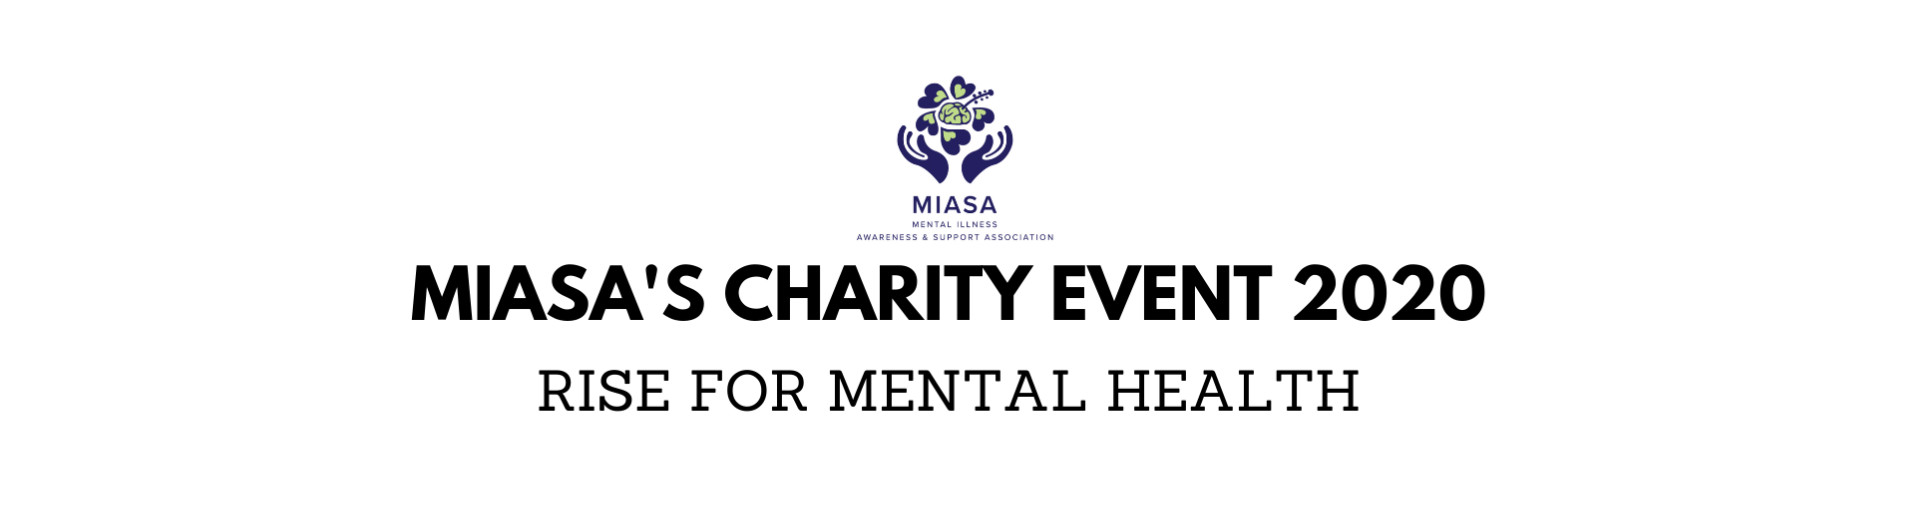 RISE FOR MENTAL HEALTH - MIASA's Charity Event 2020